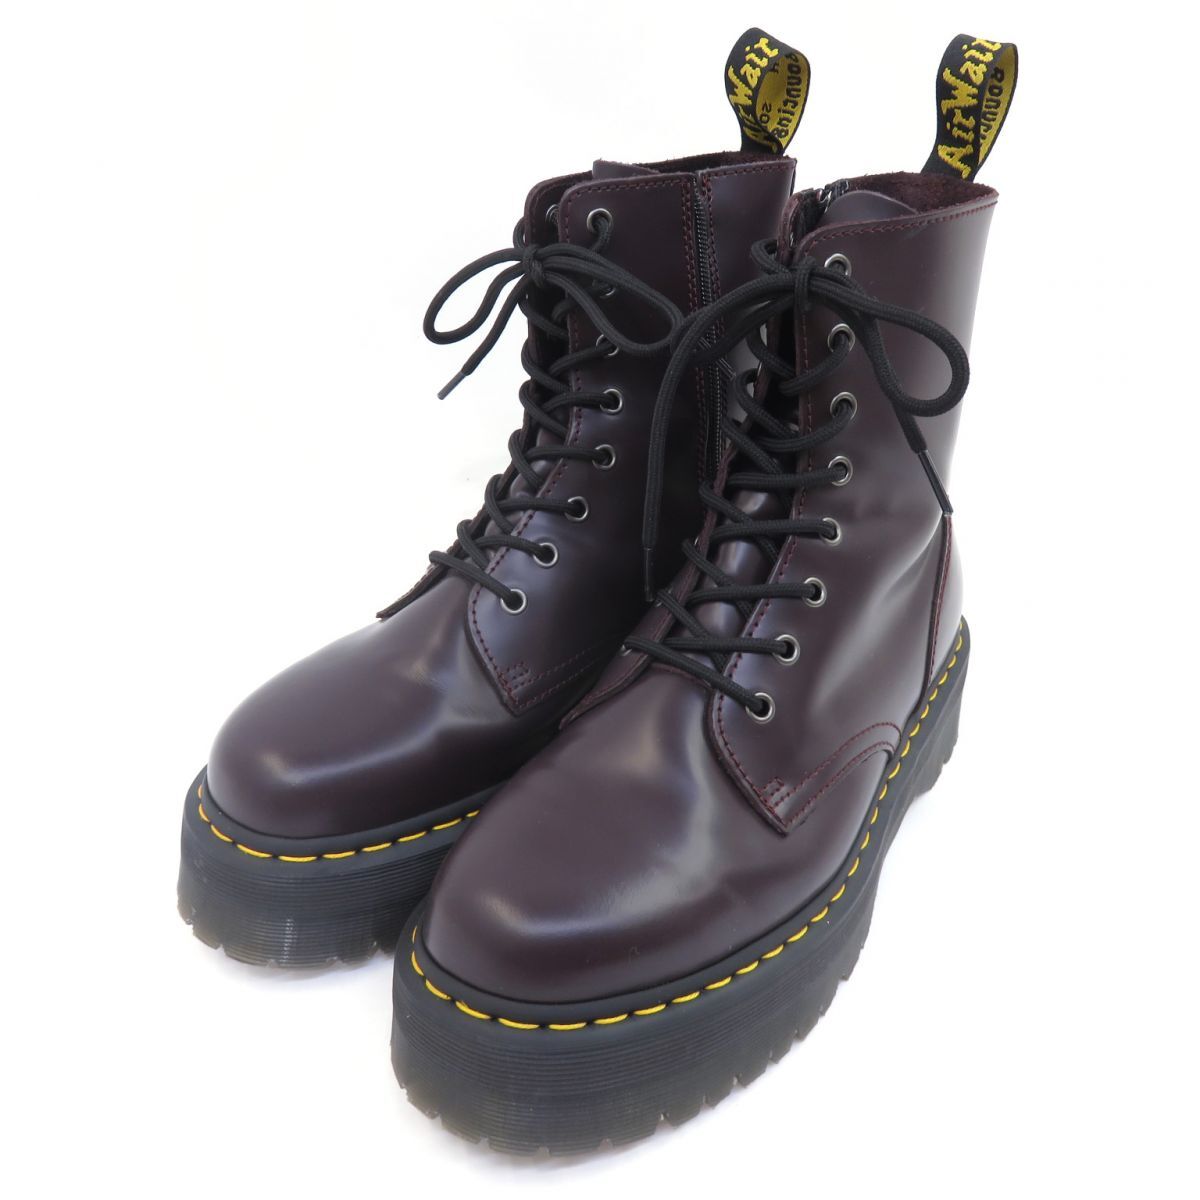 156s Dr.Martens Dr. Martens 8 hole boots UK9/28cm box less * used 